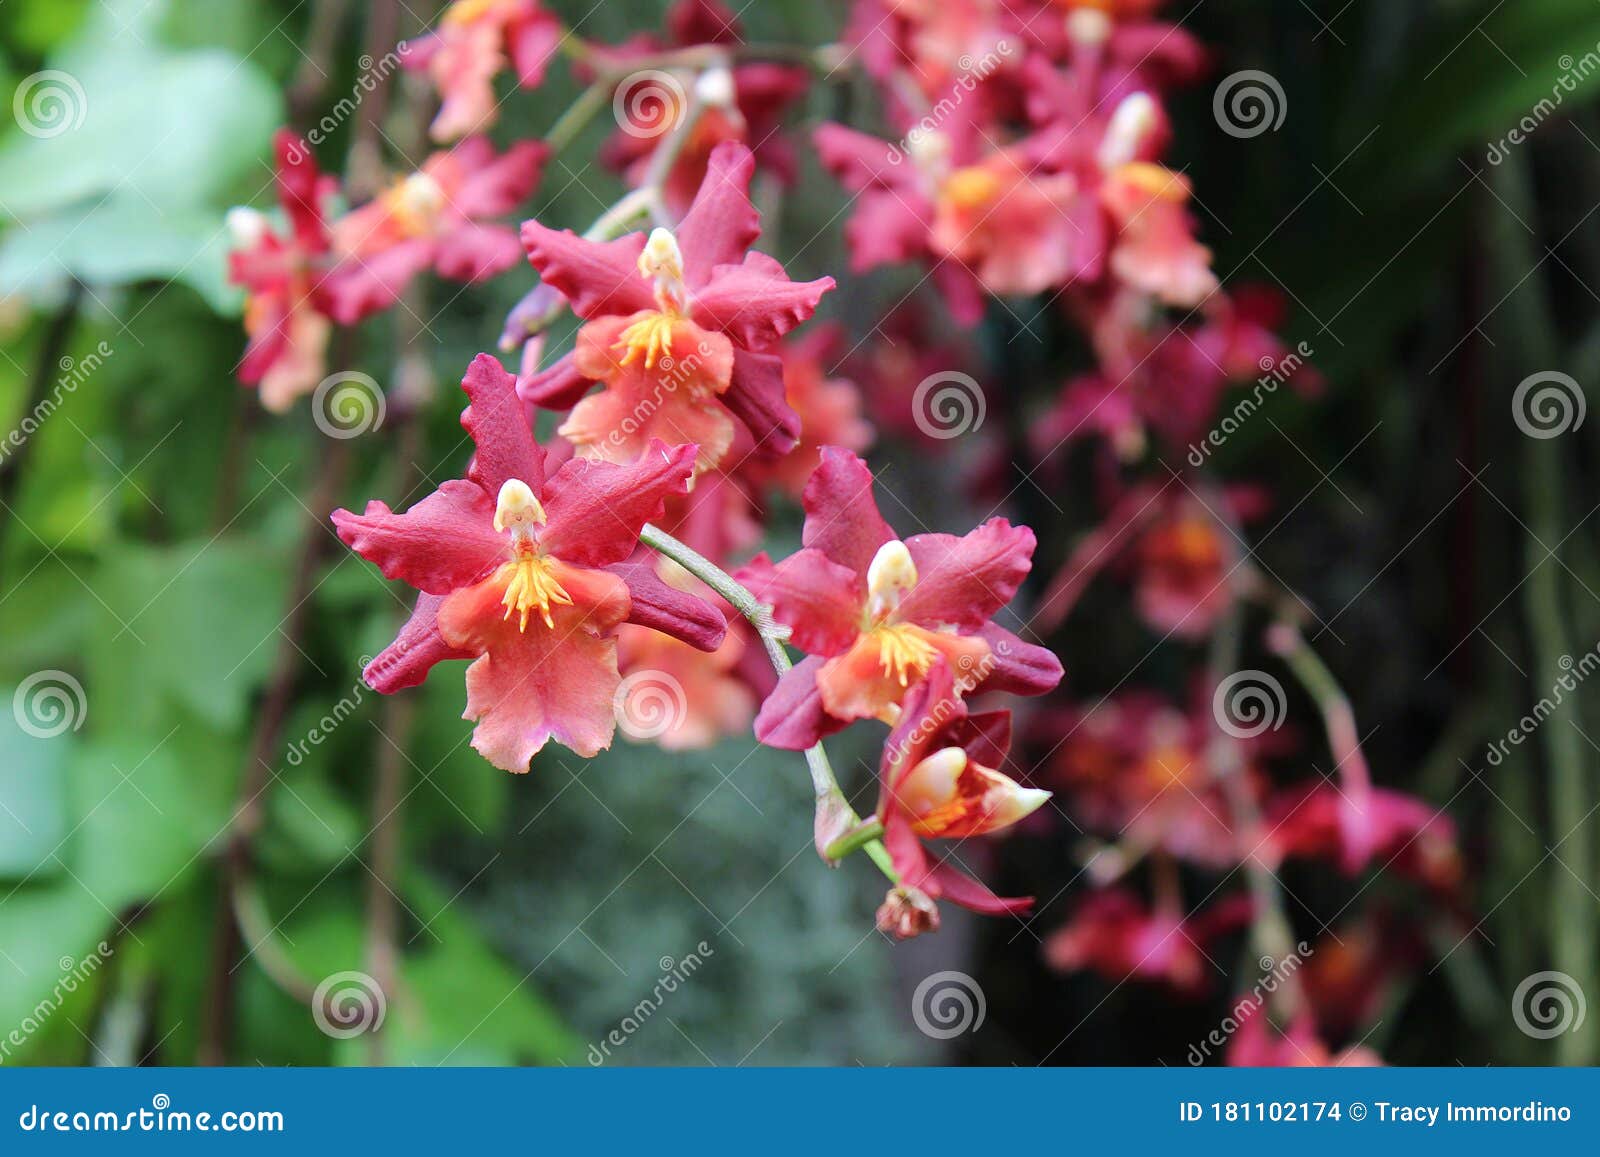 Close Up Of A Branch Of Pink Oncidium Orchid Flowers Stock Photo Image Of Blooming Yellow 181102174